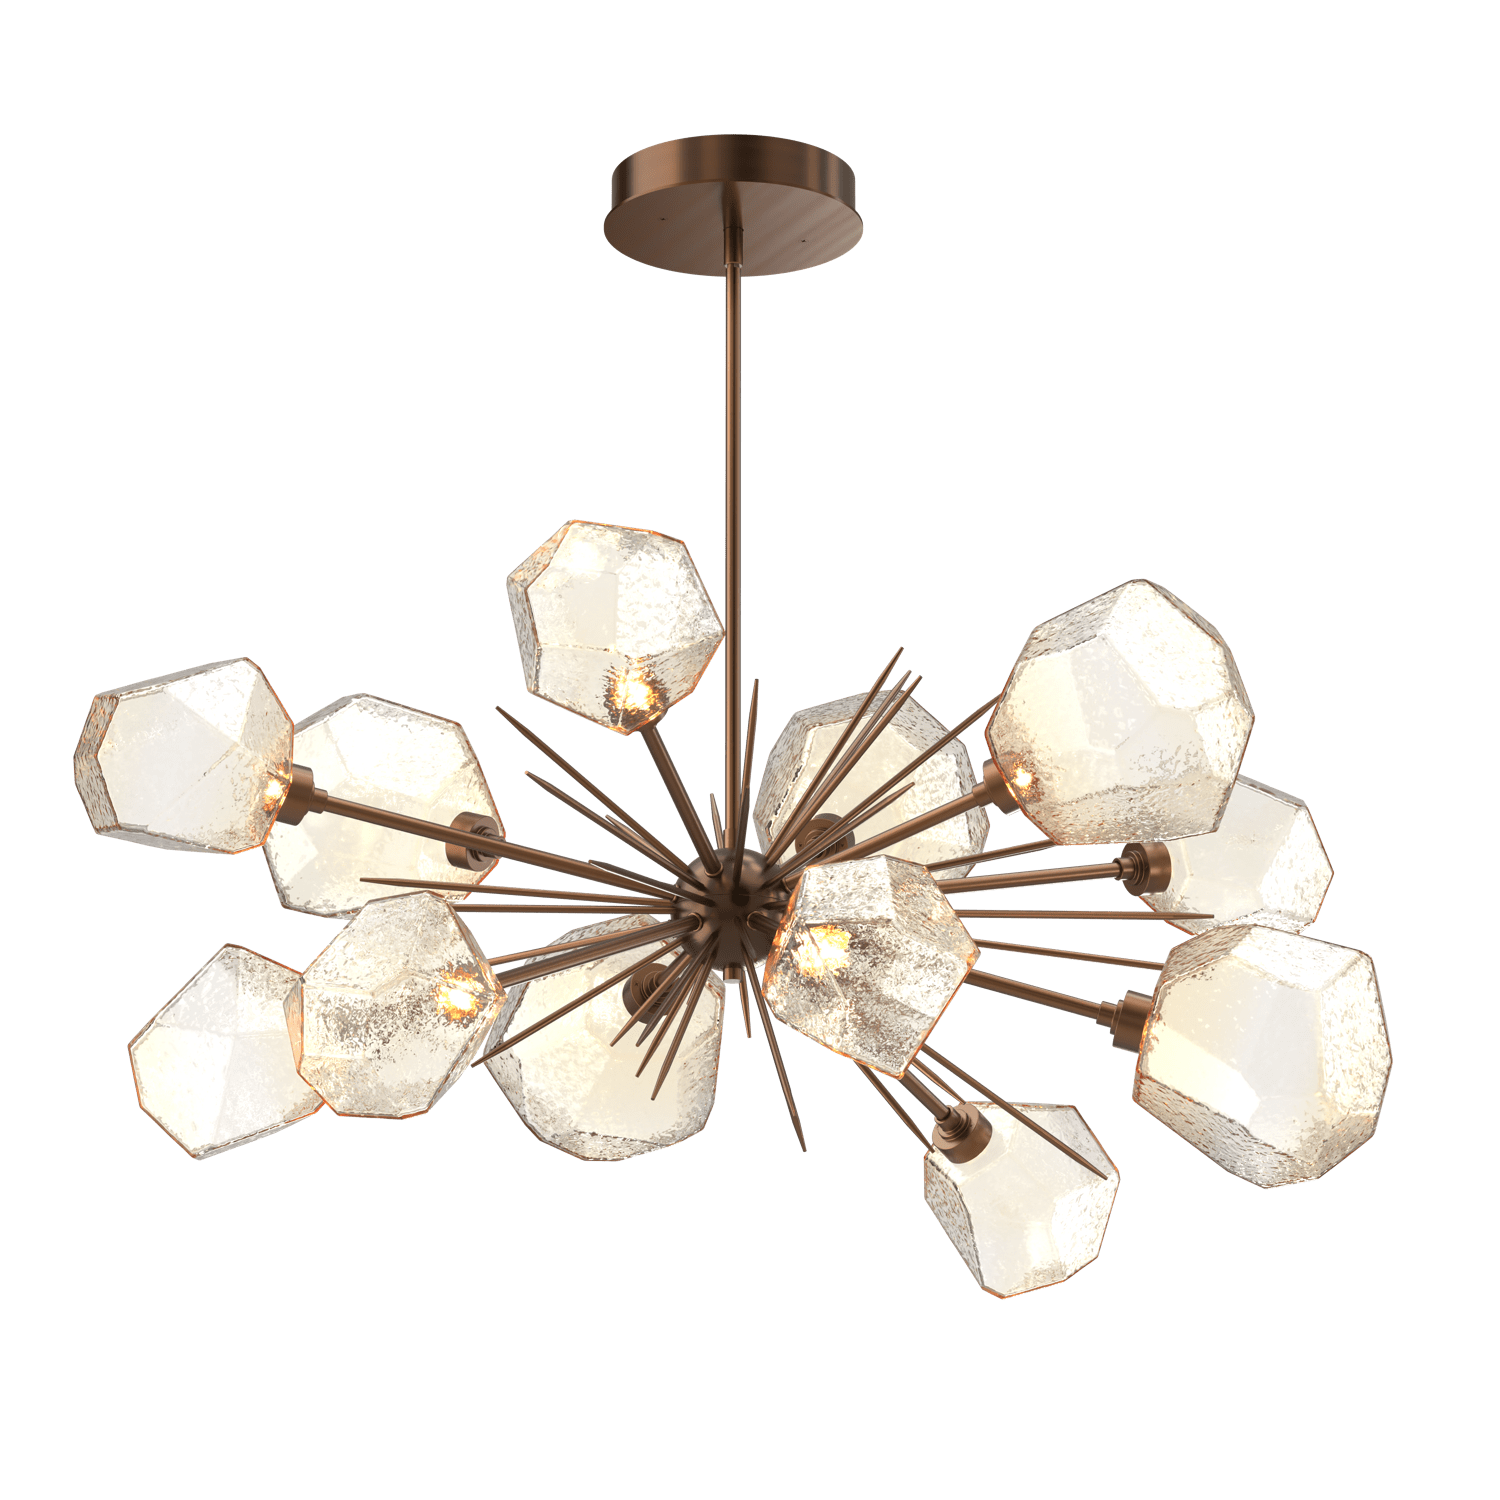 PLB0039-0D-RB-A-Hammerton-Studio-Gem-43-inch-oval-starburst-chandelier-with-oil-rubbed-bronze-finish-and-amber-blown-glass-shades-and-LED-lamping